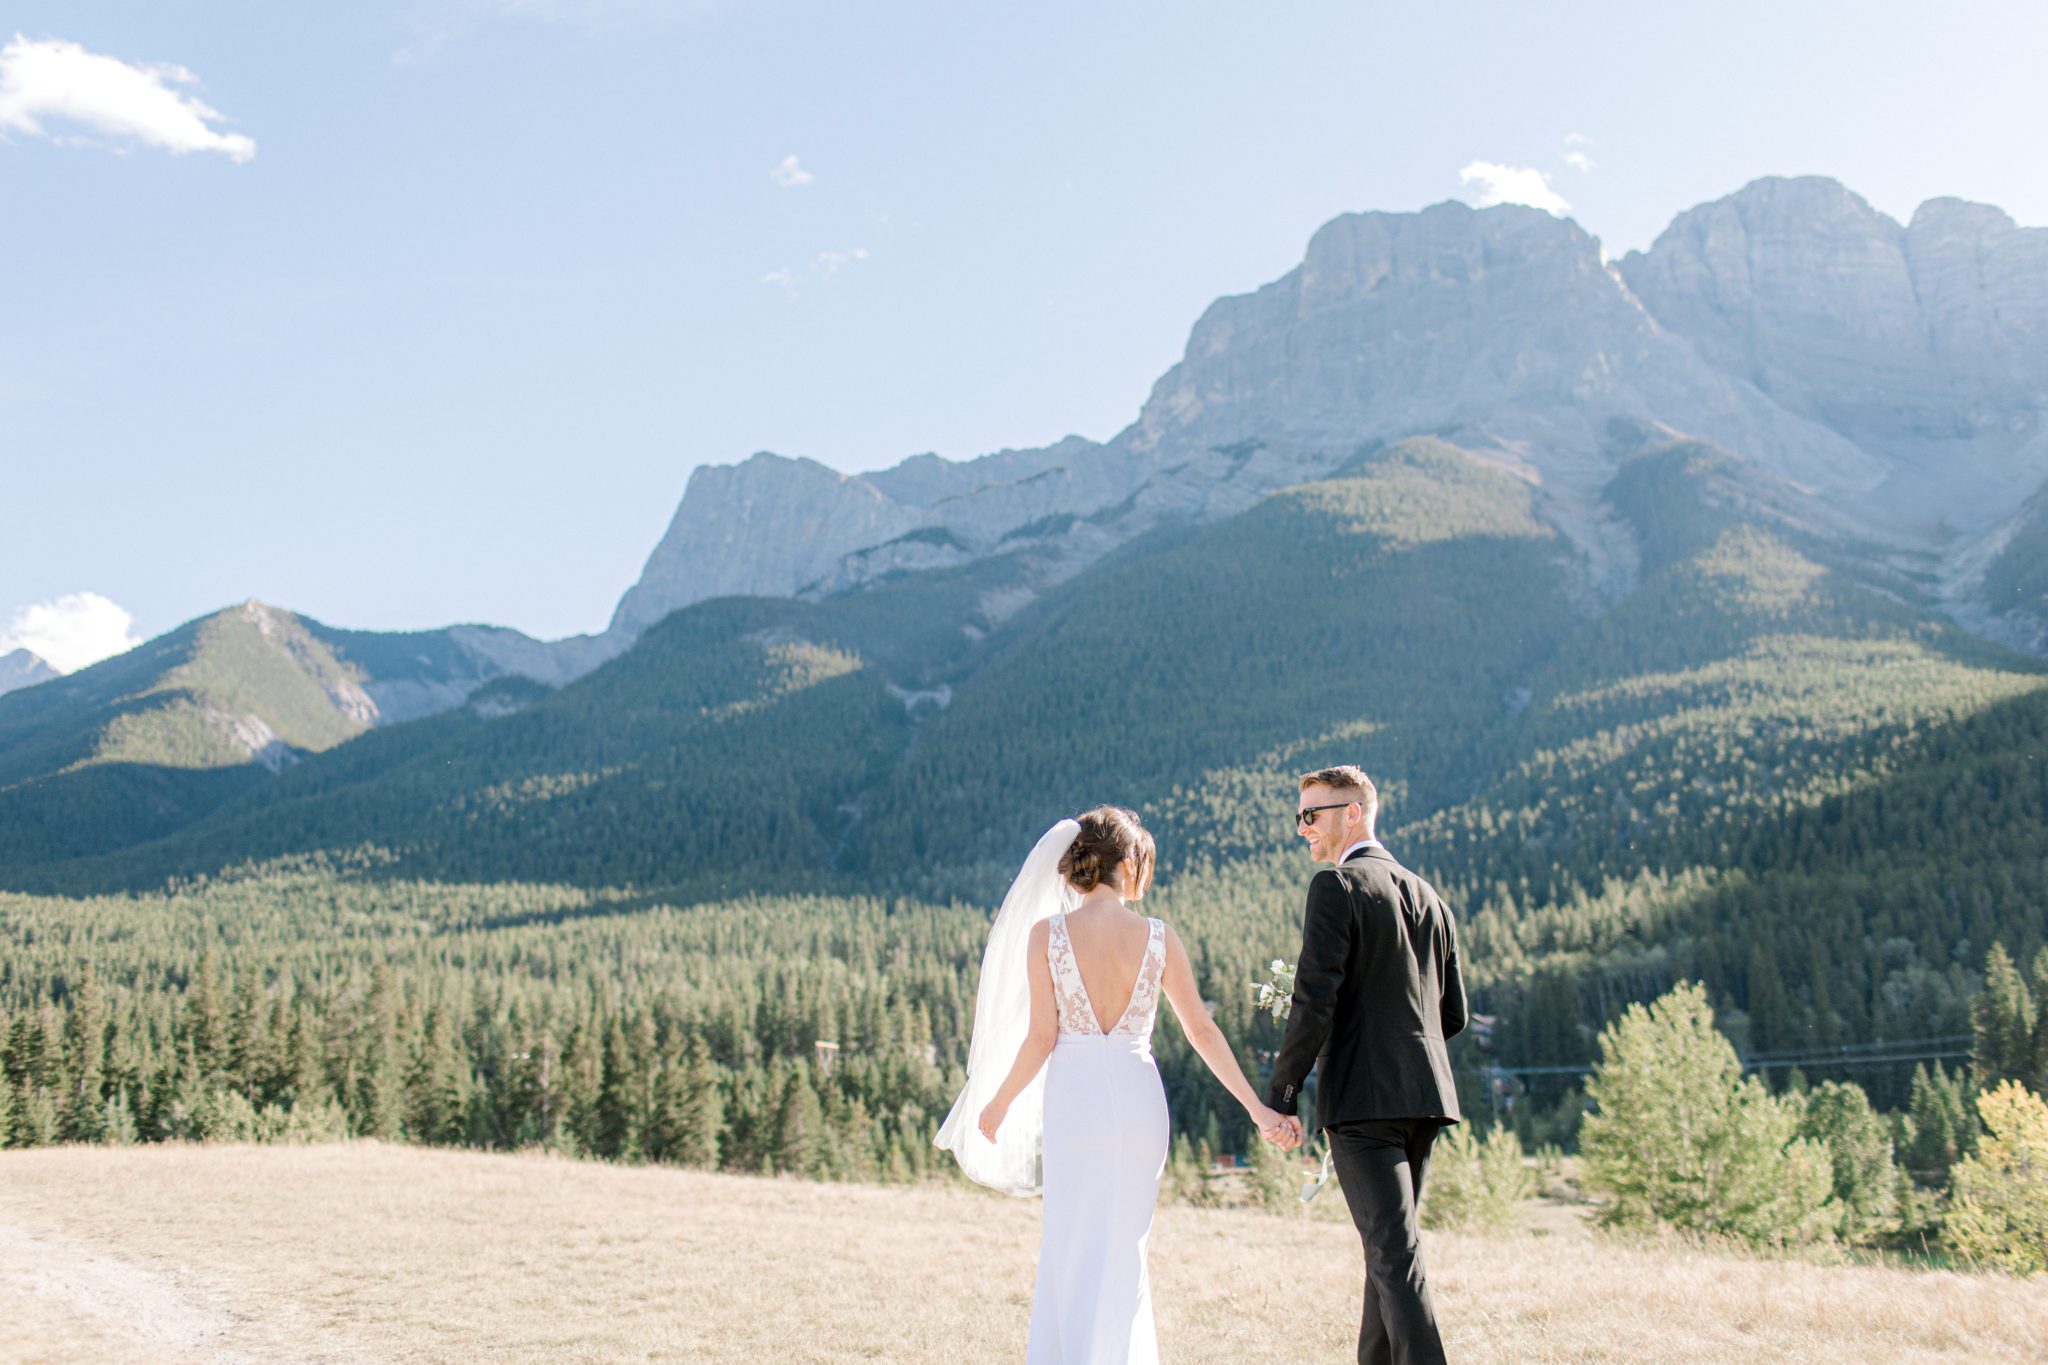 Canmore wedding portraits in the mountains; summer wedding inspiration